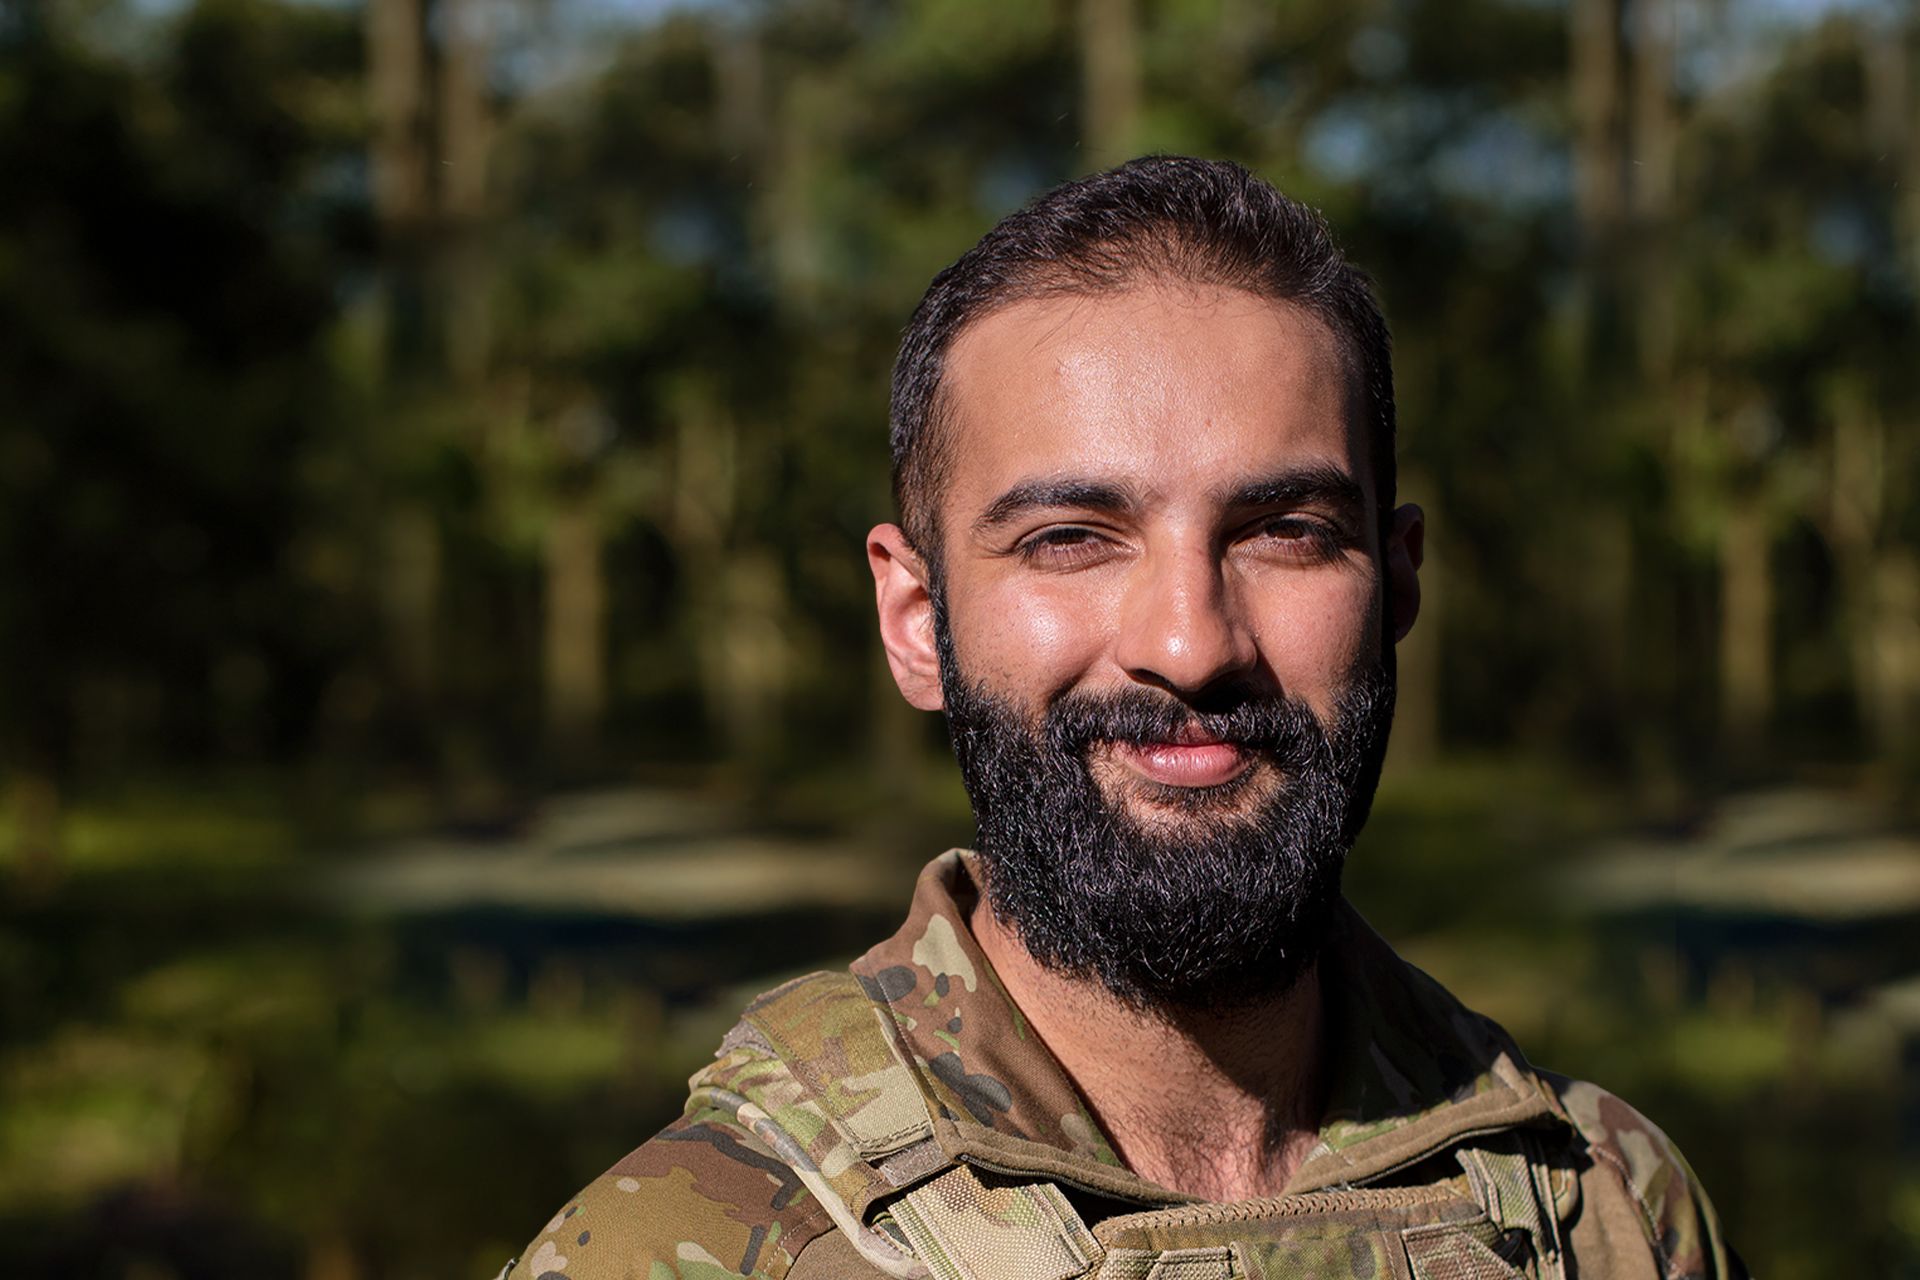 Army Reserve Officer Ammar smiles at camera.